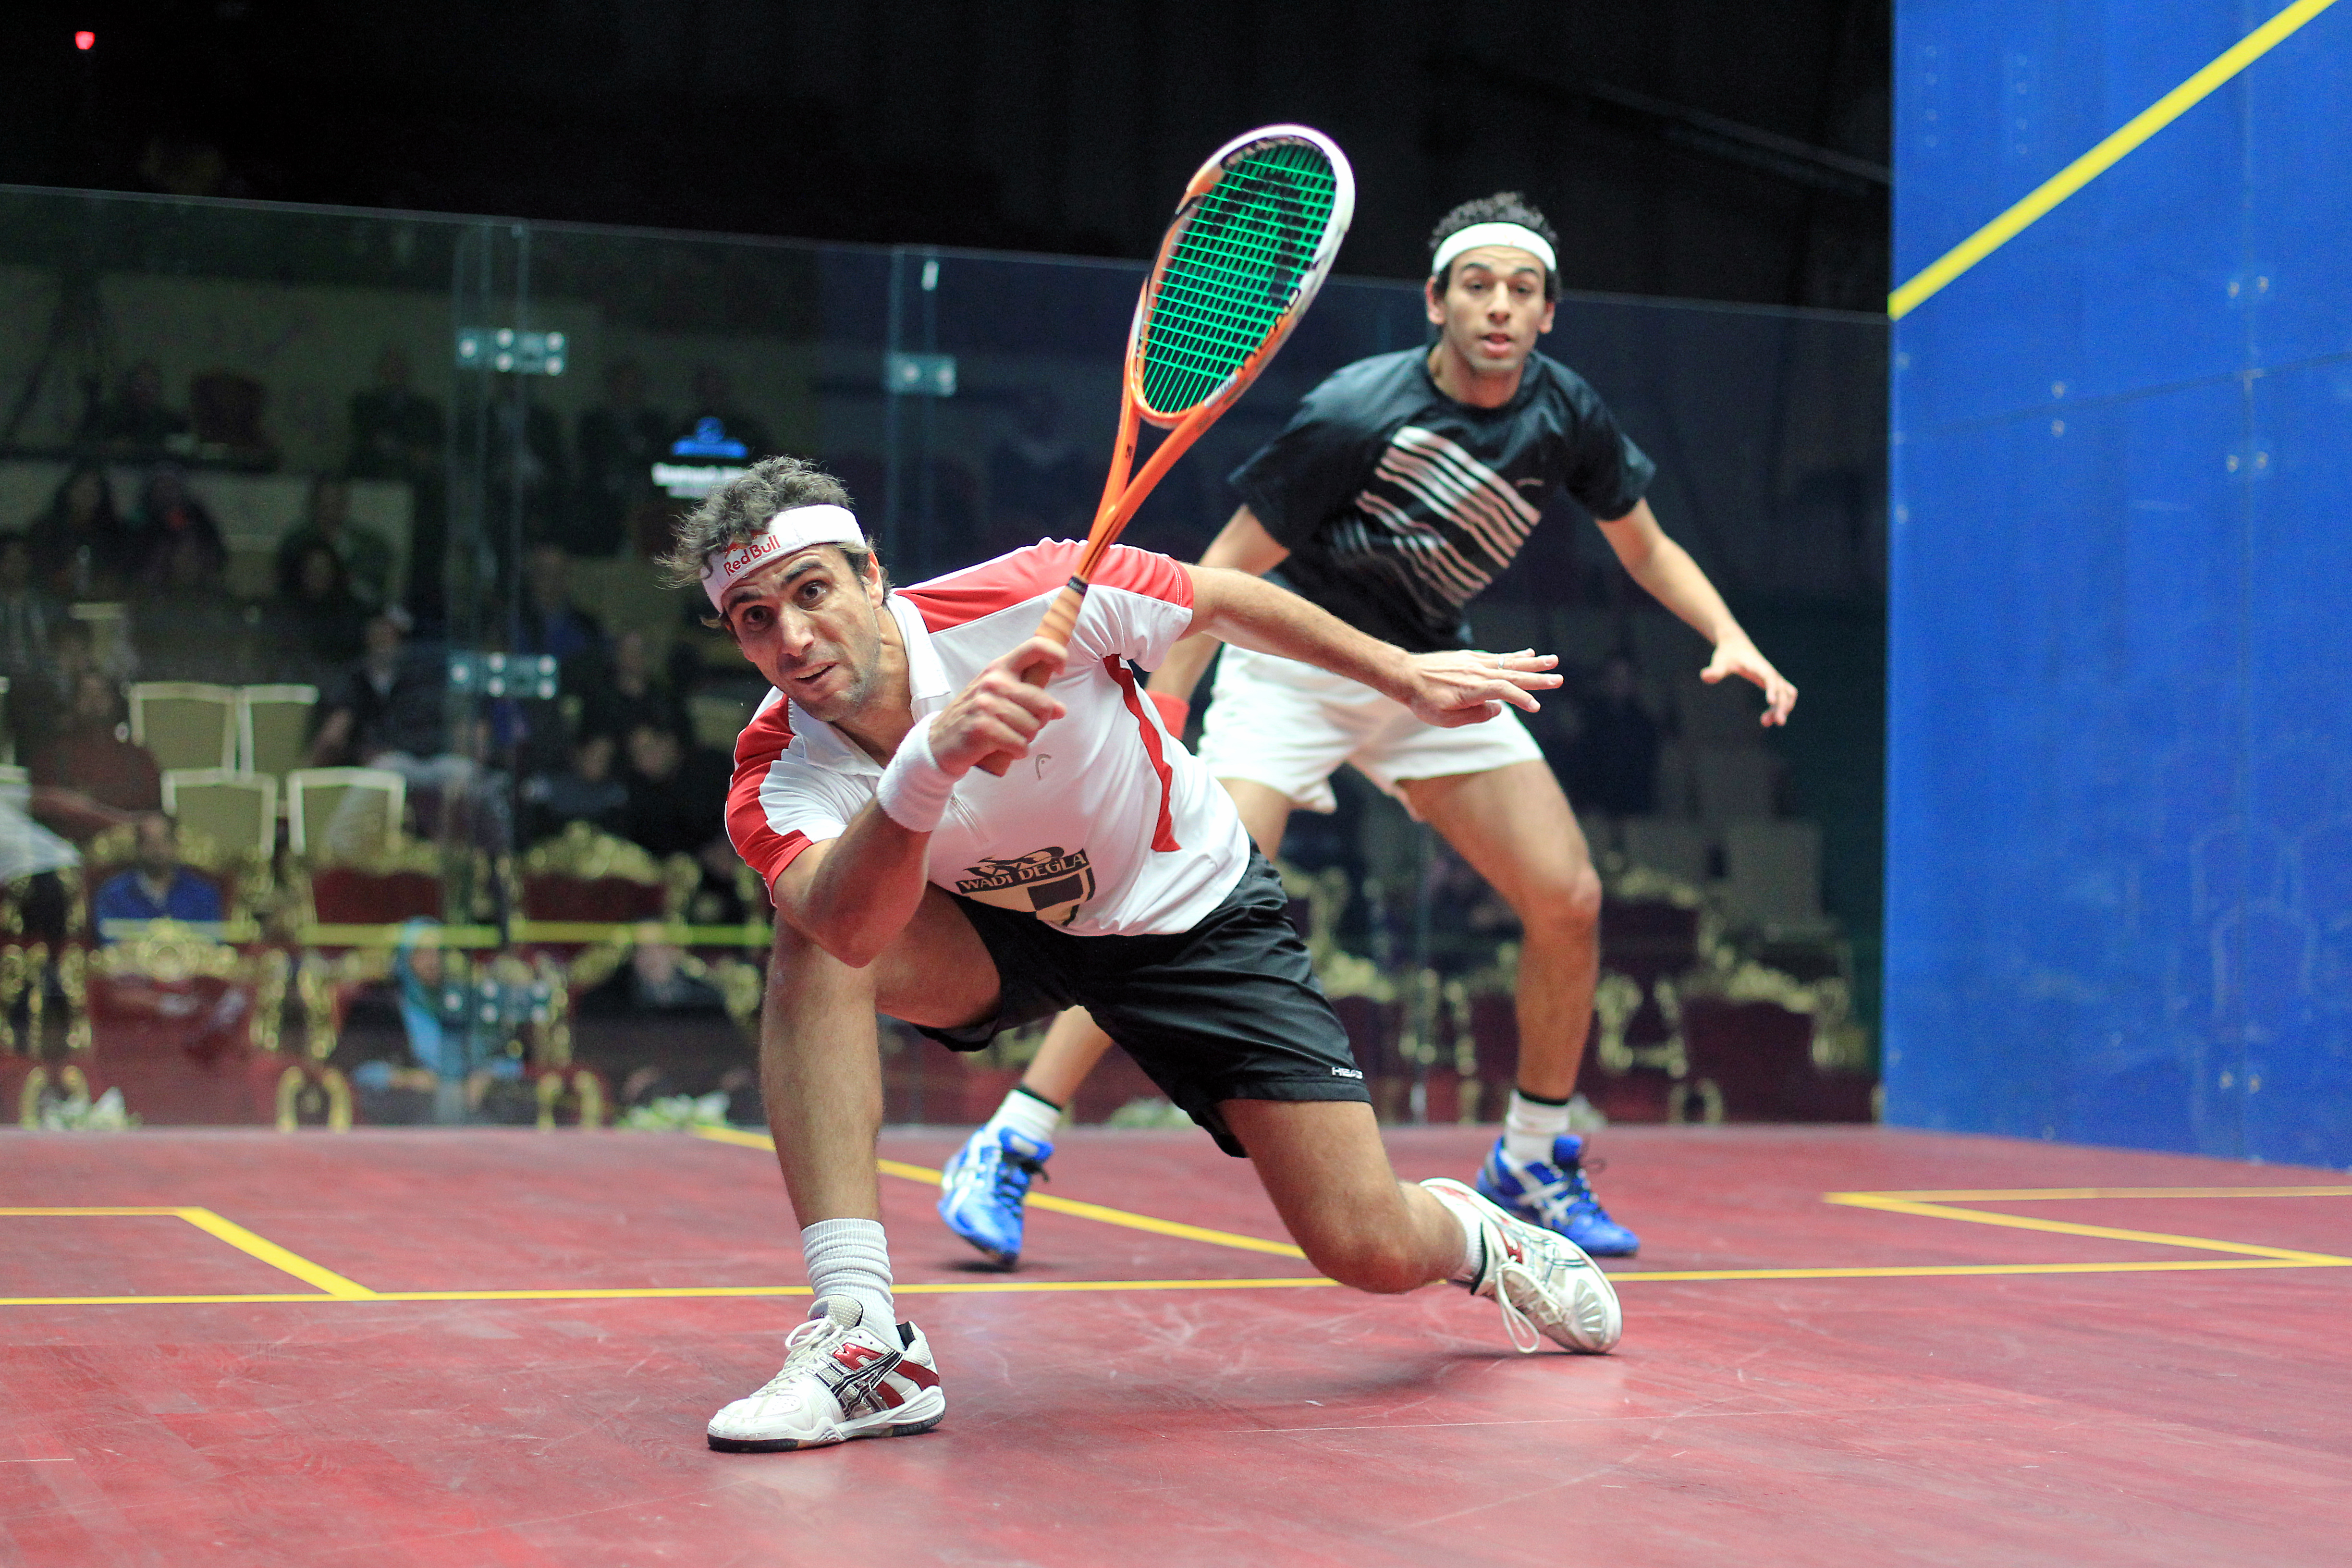 With the unique format of the Kuwait Cup, in which the match-ups were redrawn before the quarterfinals, Karim Darwish (L) and countryman Mohamed El Shorbagy squared-off in the semifinals instead of a potential clash in a final. Darwish needed four games to advance to the final, including a 15-13 fourth.